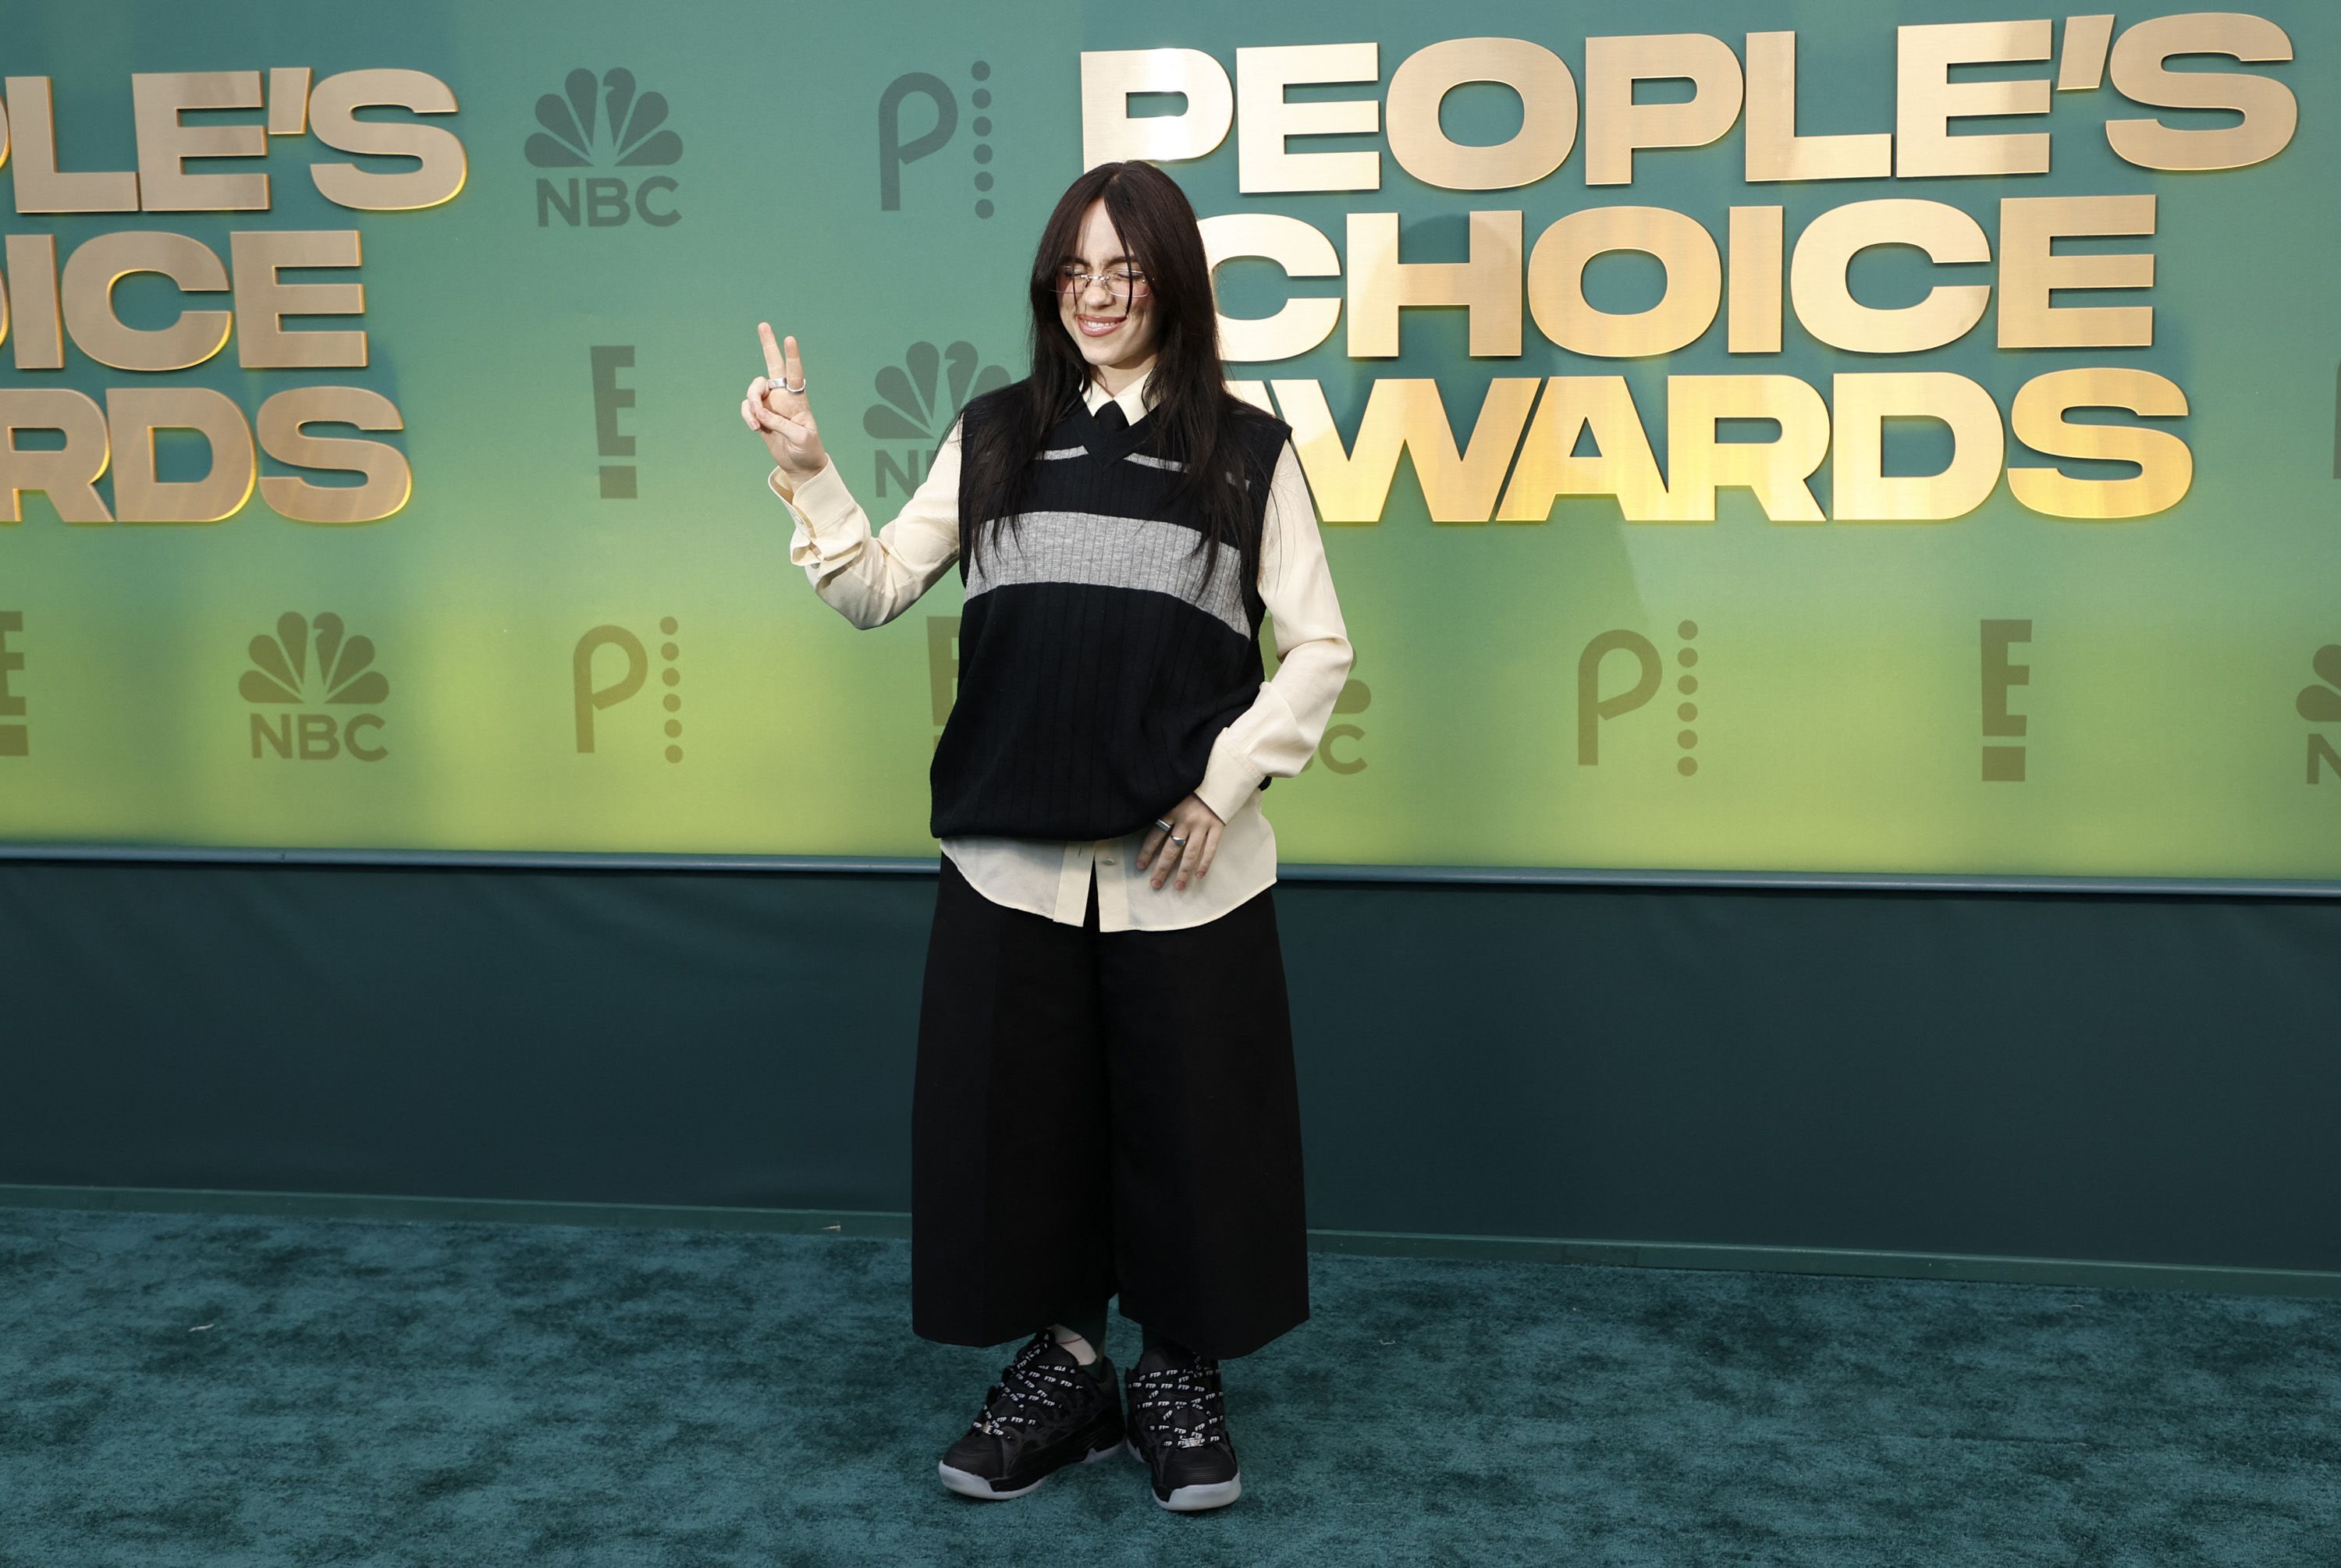 With her hair back to all black, Billie Eilish chose a sweater vest, shirt and tie combo teamed with baggy trousers and chunky shoes. The singer won the "TV Performance of the Year" award for her appearance in "Swarm."